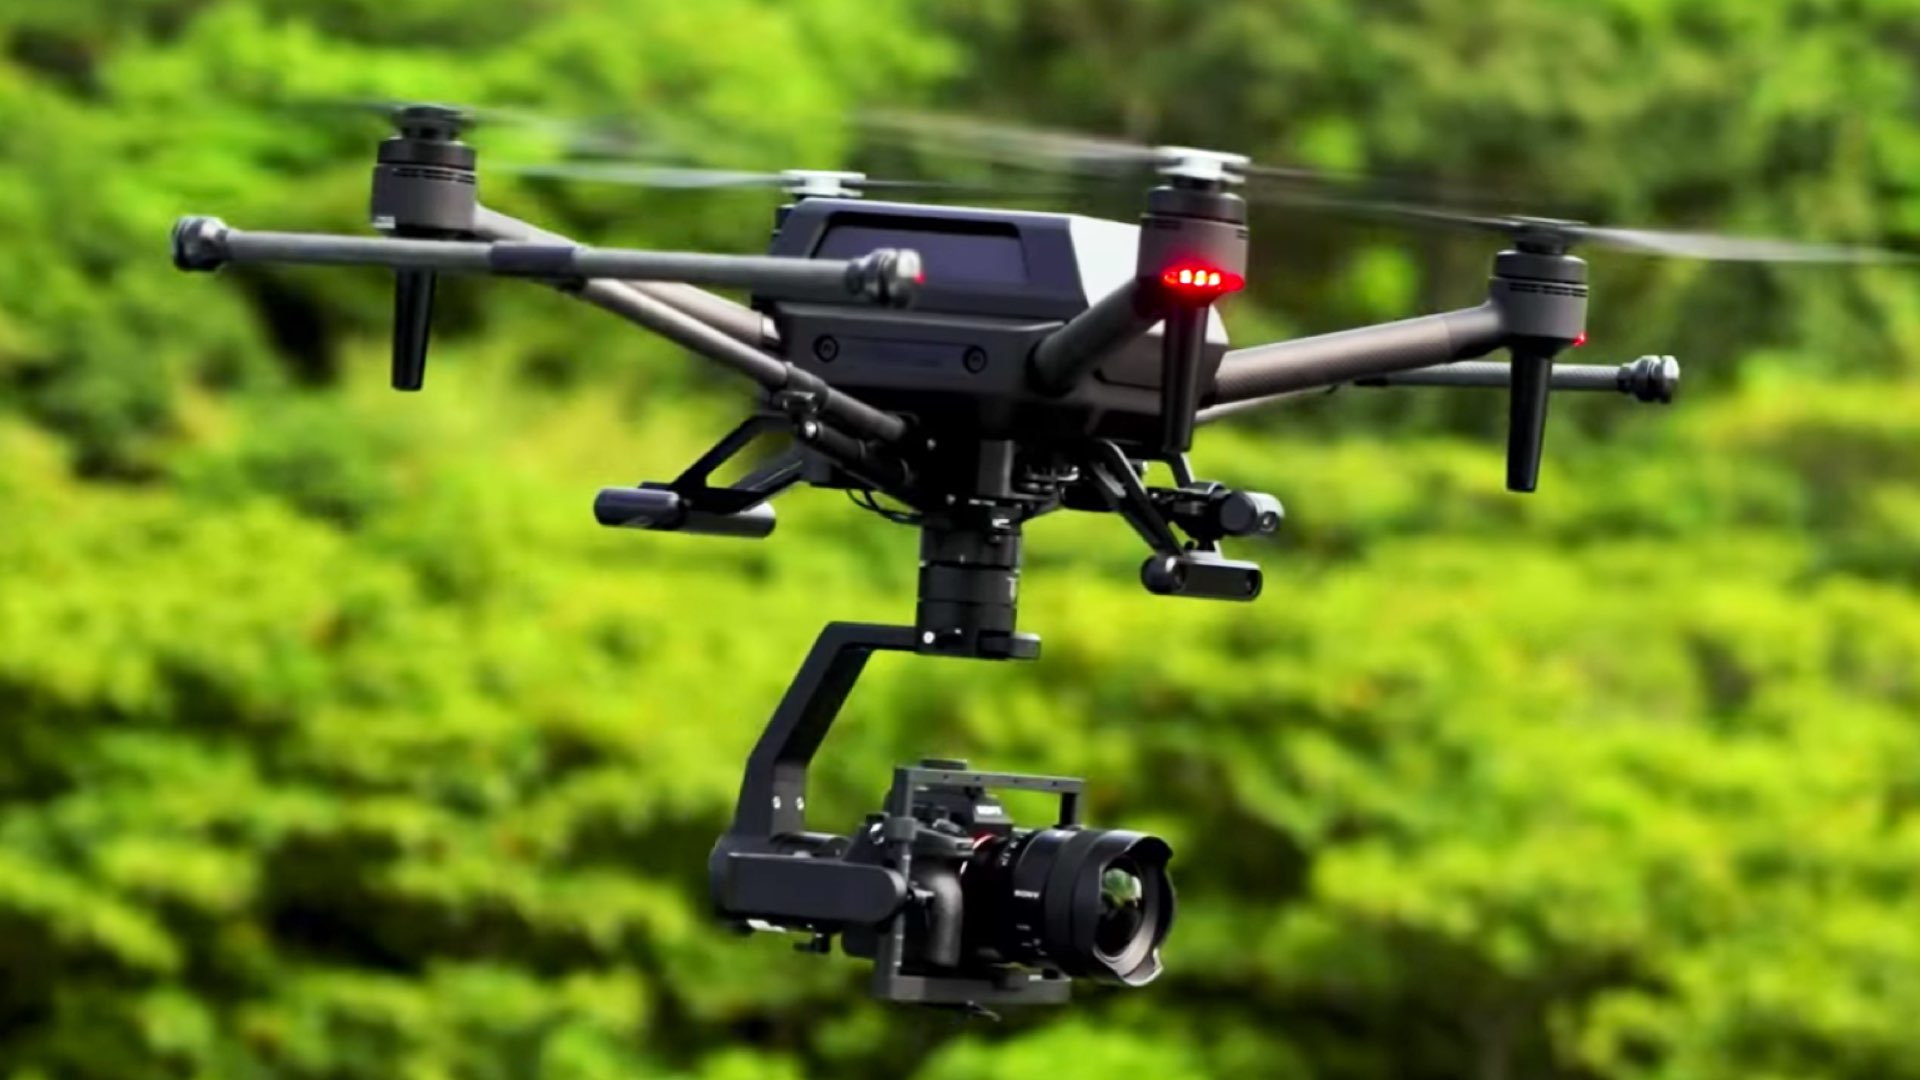 Sony Updates the Status of its Drone (Airpeak): To be Used With the Alpha Cameras, FX3 and G-Master Lenses